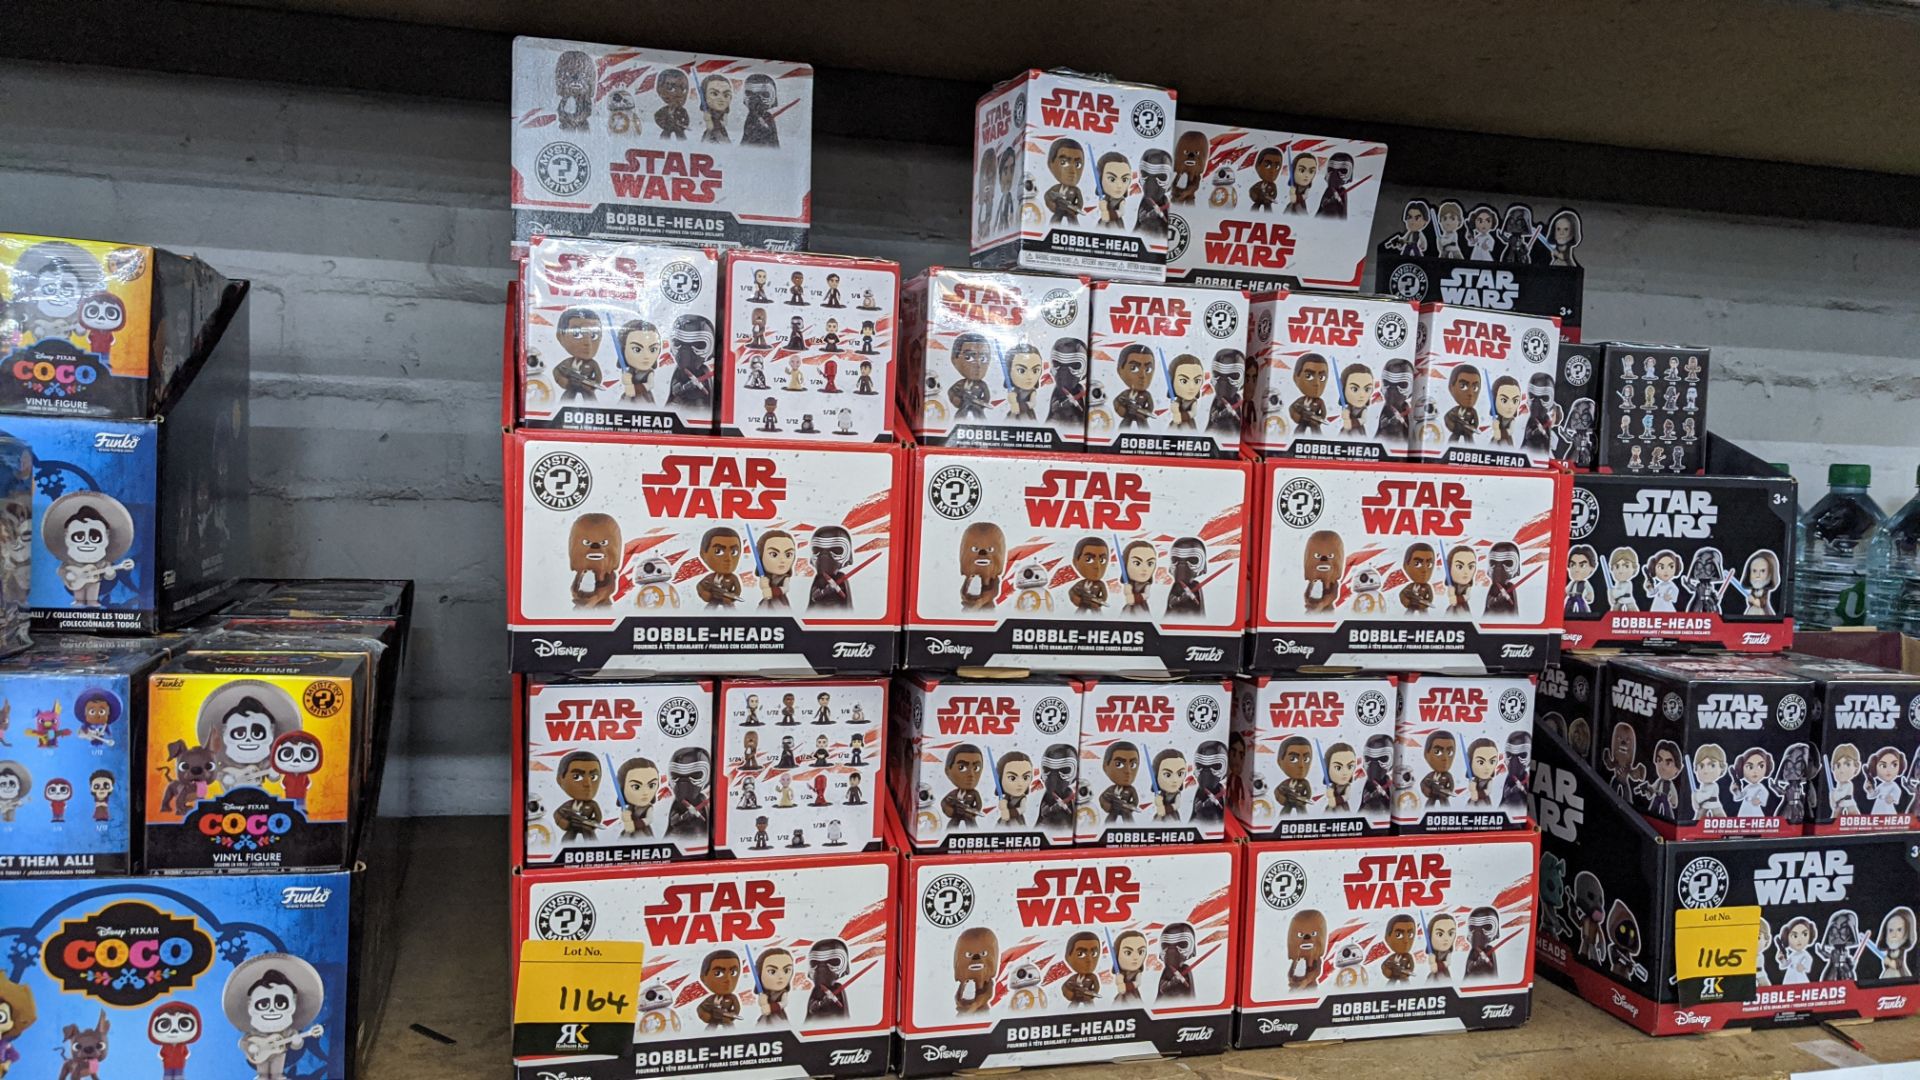 144 off Star Wars Bobble Heads. IMPORTANT – DO NOT BID BEFORE READING THE IMPORTANT INFORMATION